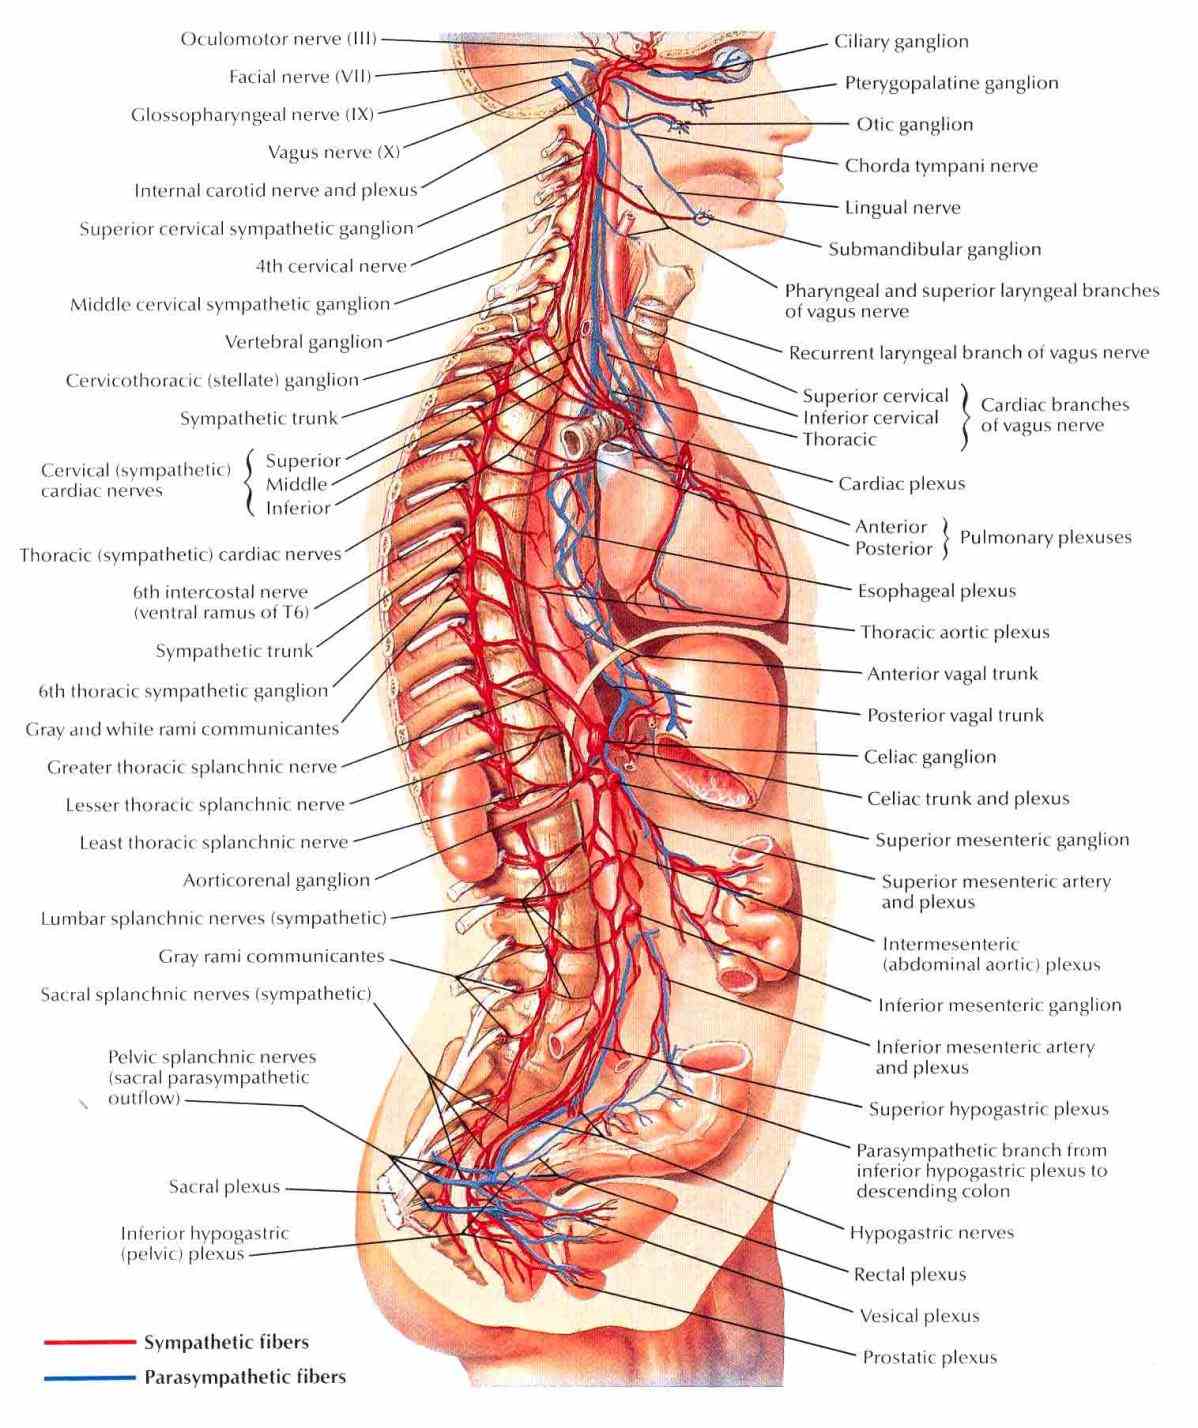 learn about the structure and function of nervous system using interactive animations diagrams the Anatomy The Nervous System picture